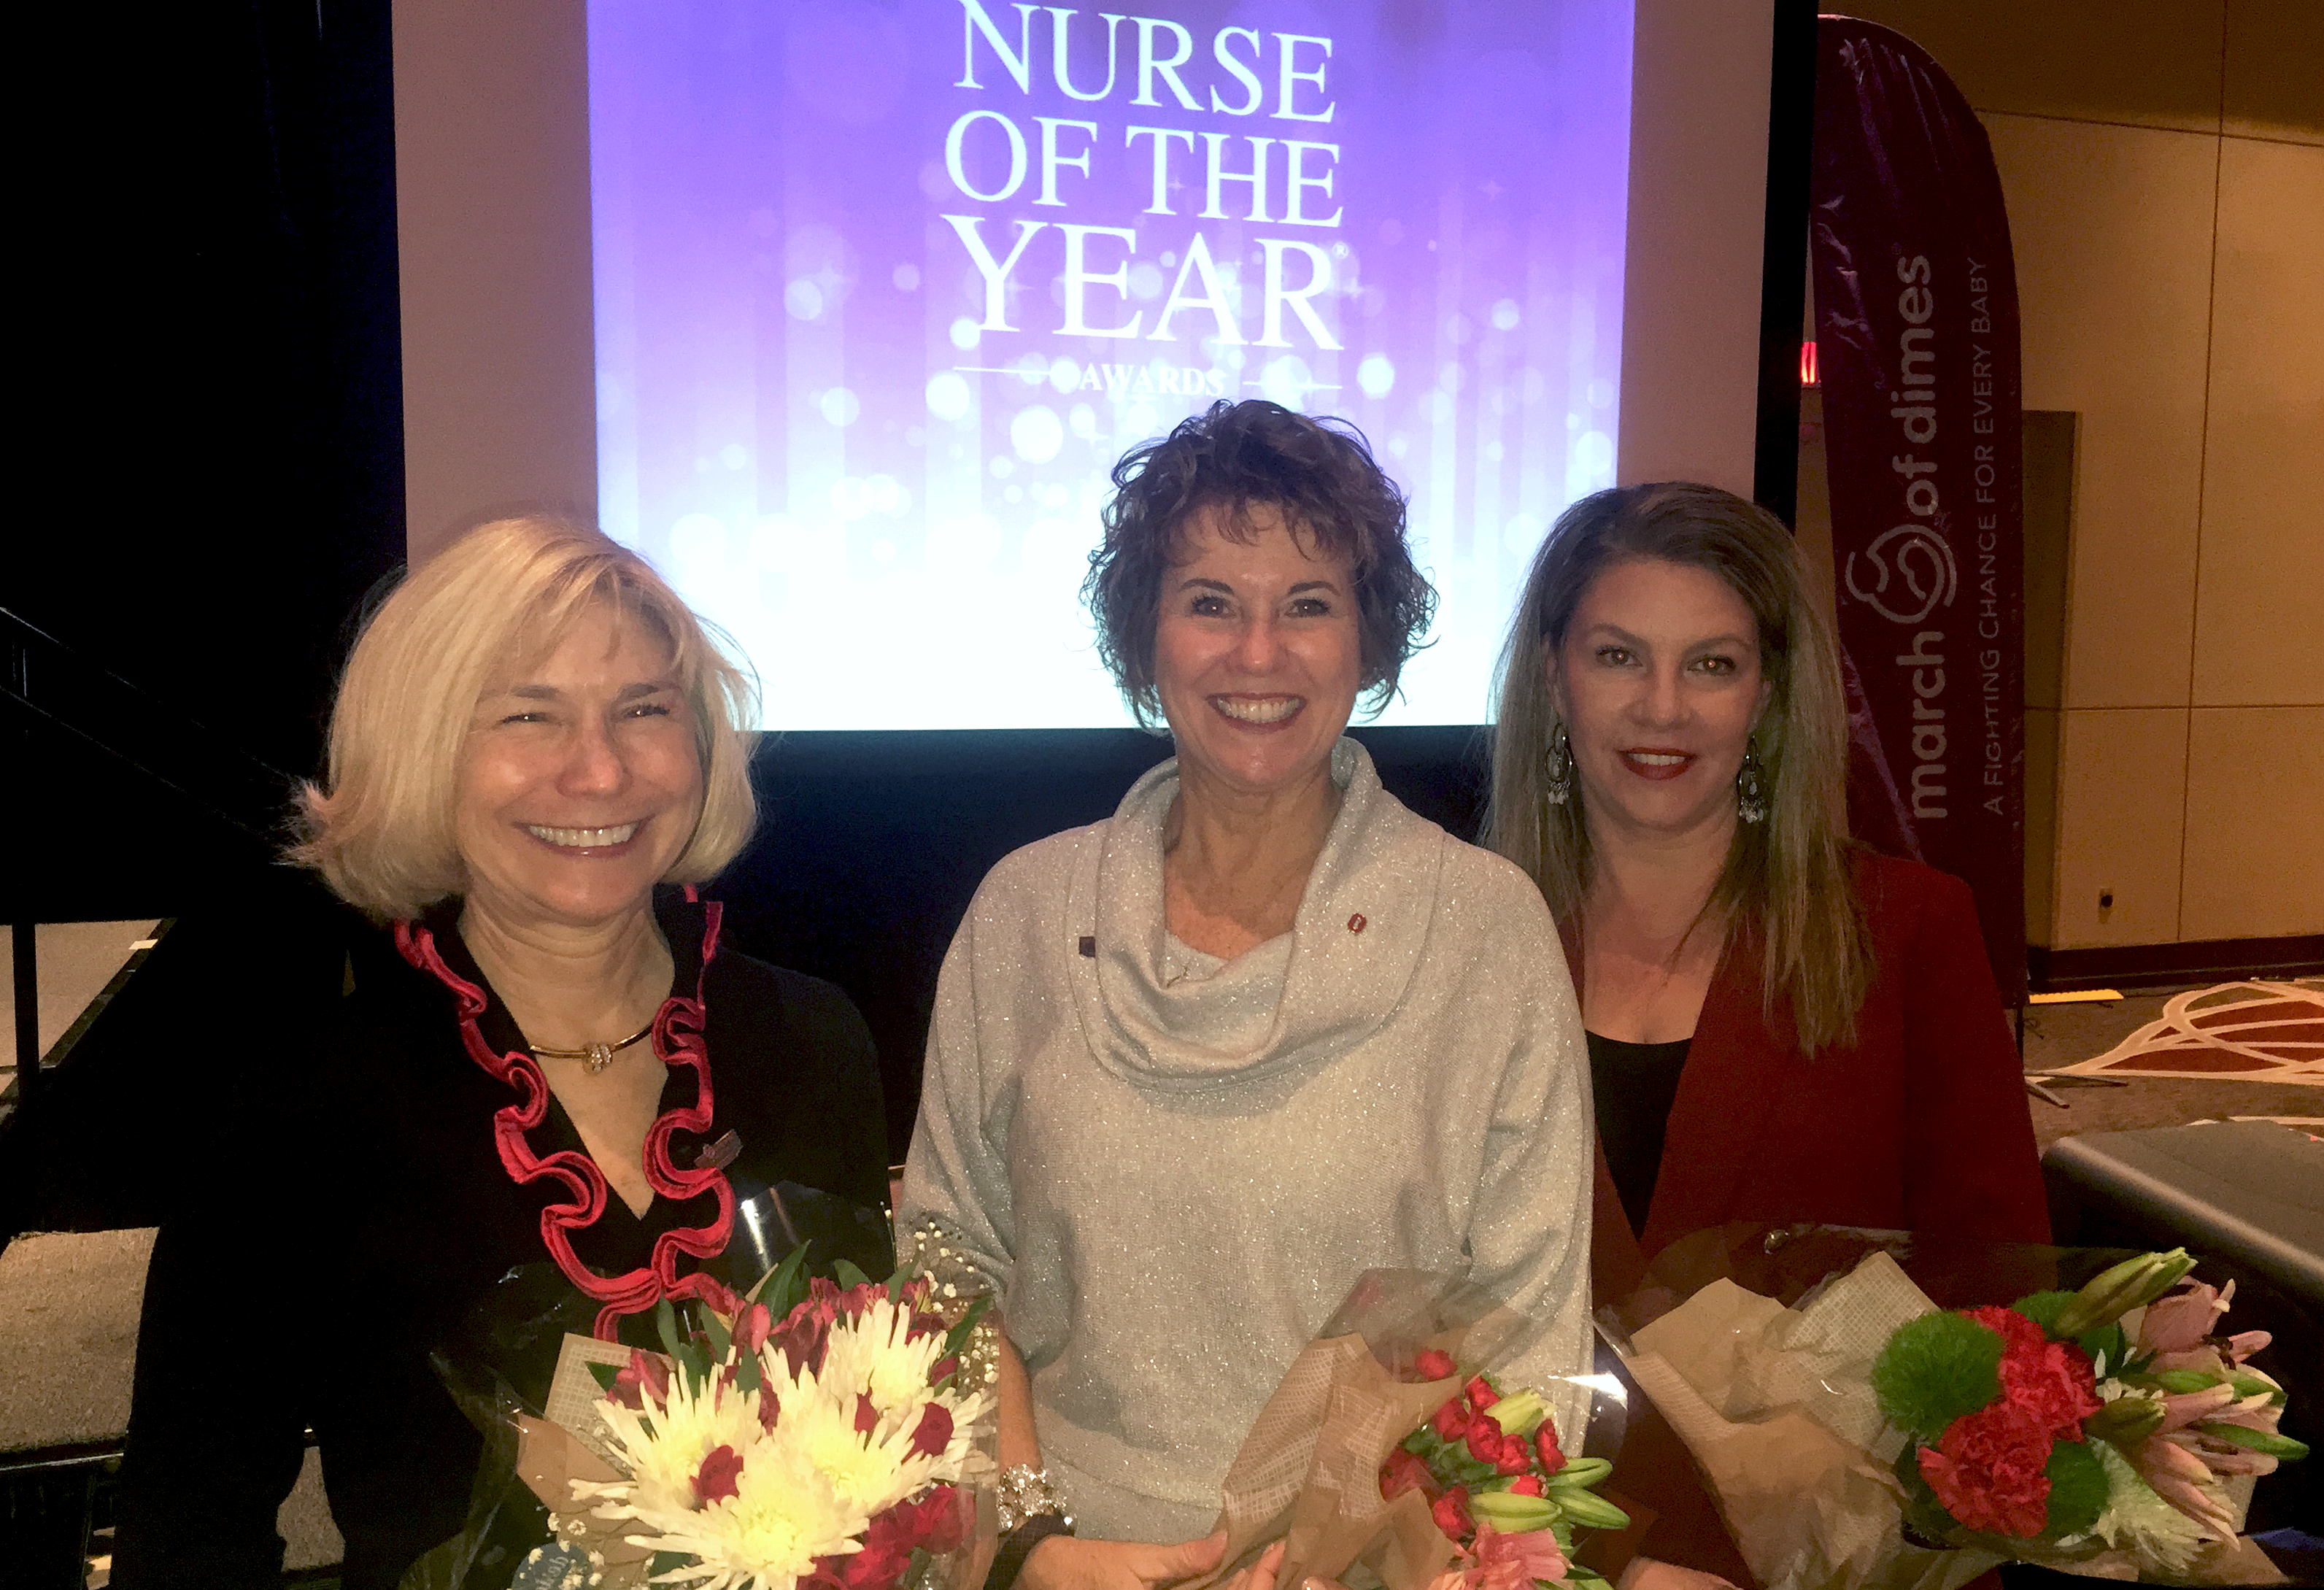 Lizzie Fitzgerald, Candy Rinehart and Michele Balas at the Nurse of the Year Awards